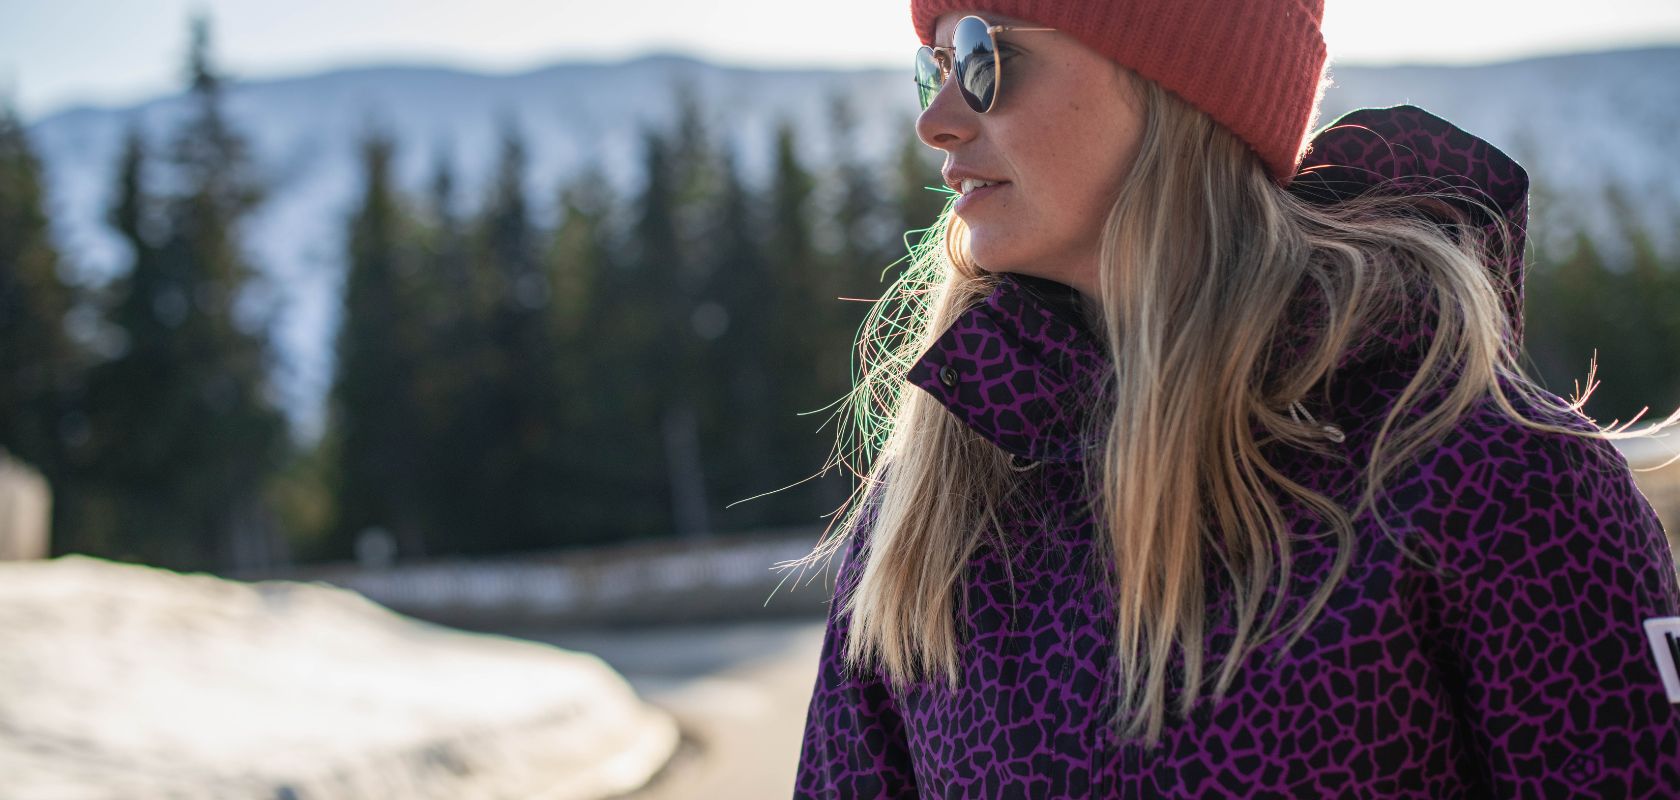 7 Steps to Buying the Perfect Ski Jacket